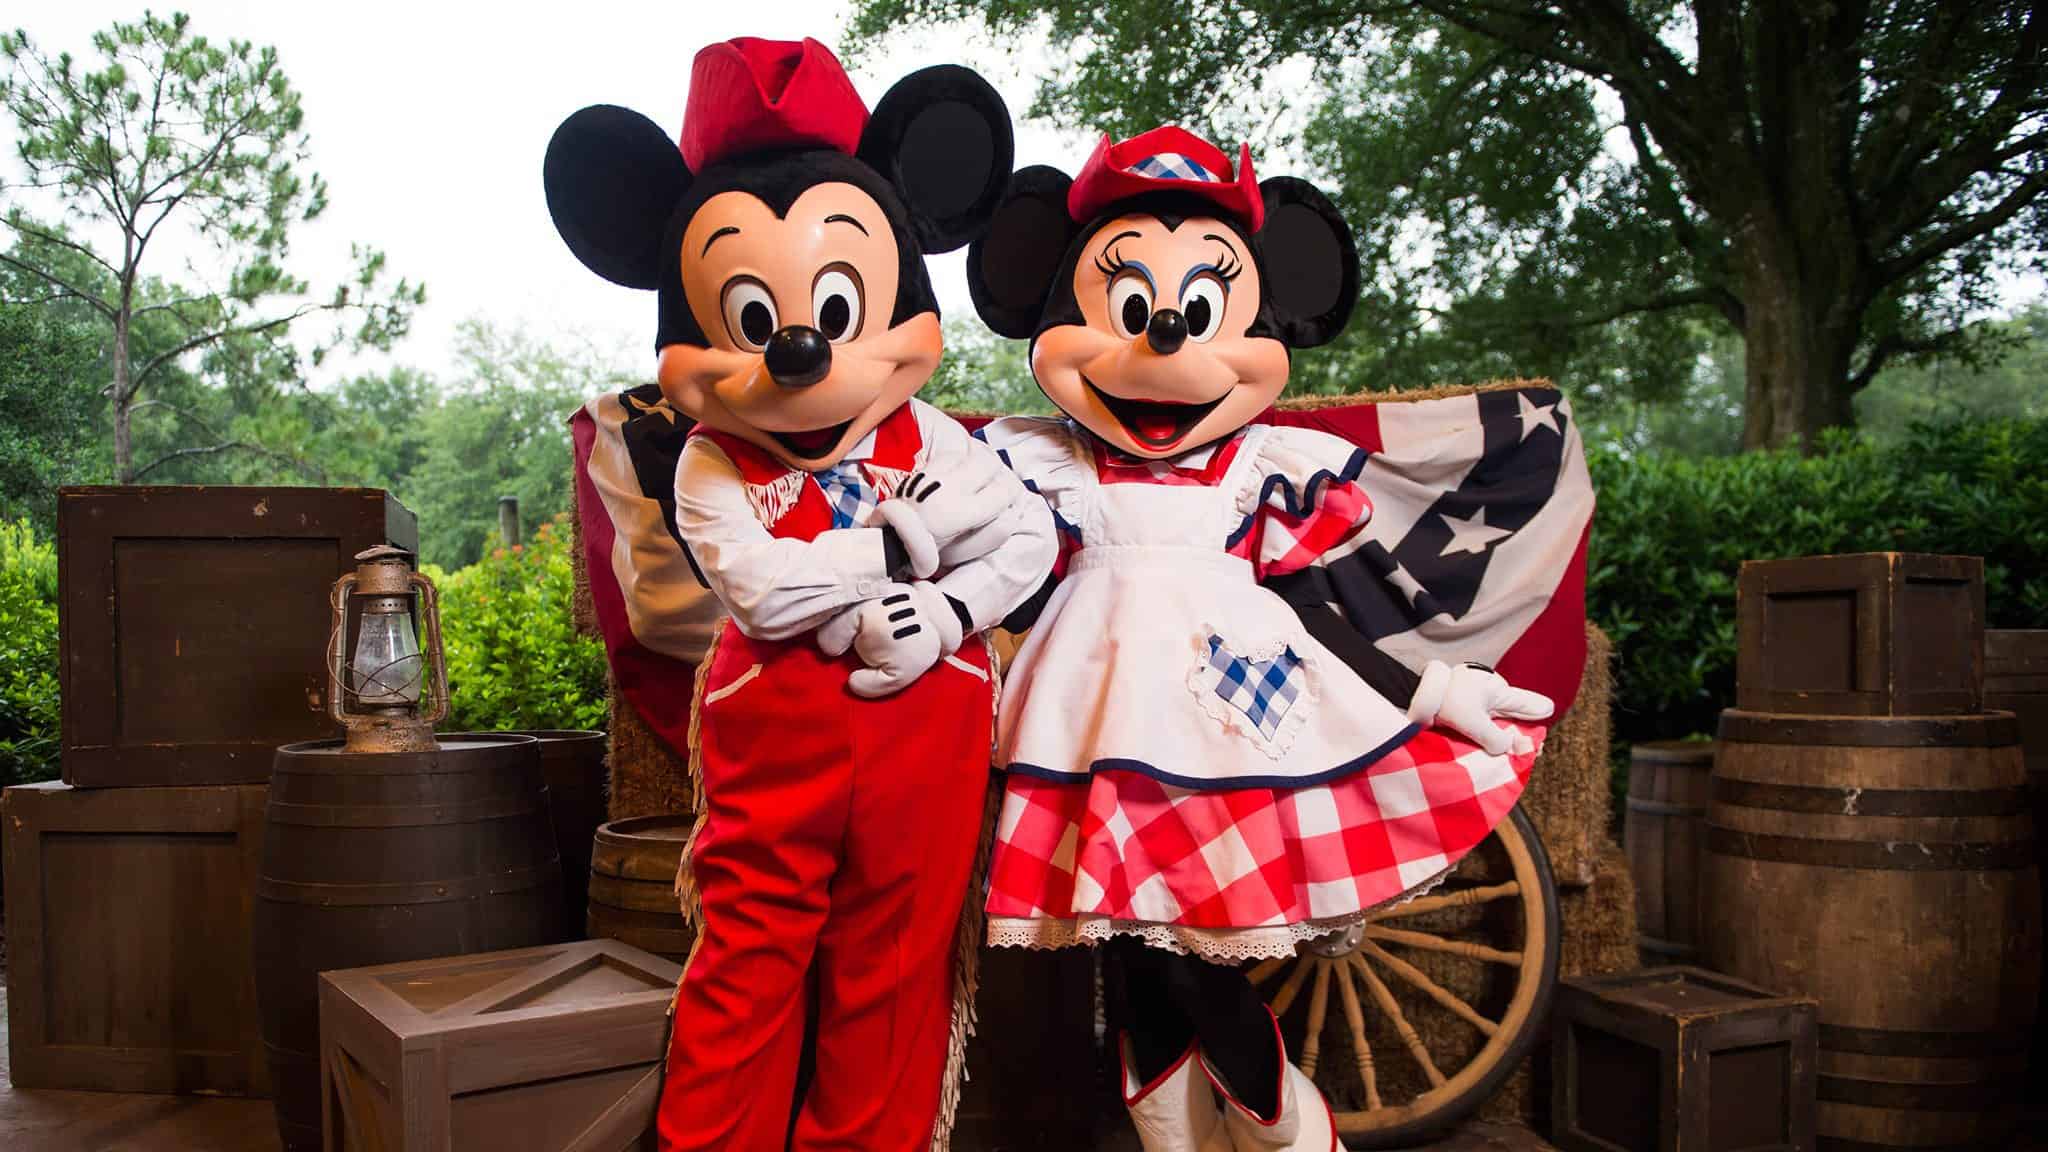 Where to meet Mickey Mouse at Disney World